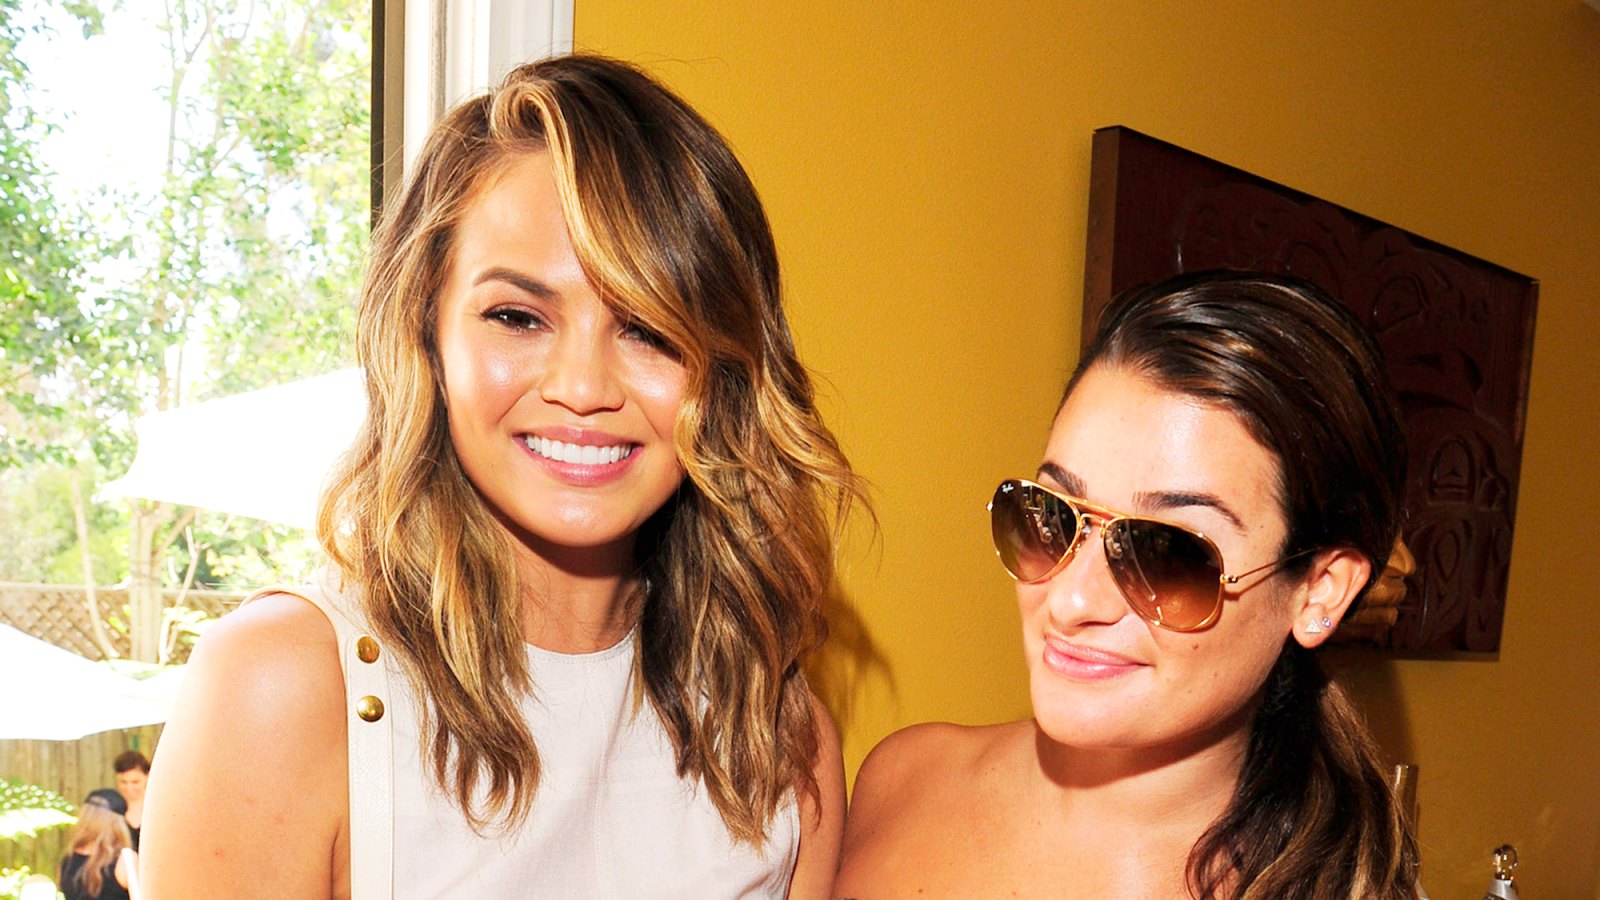 Chrissy Teigen and Lea Michele attend the 2014 Jen Klein Day of Indulgence Party in Los Angeles, California.